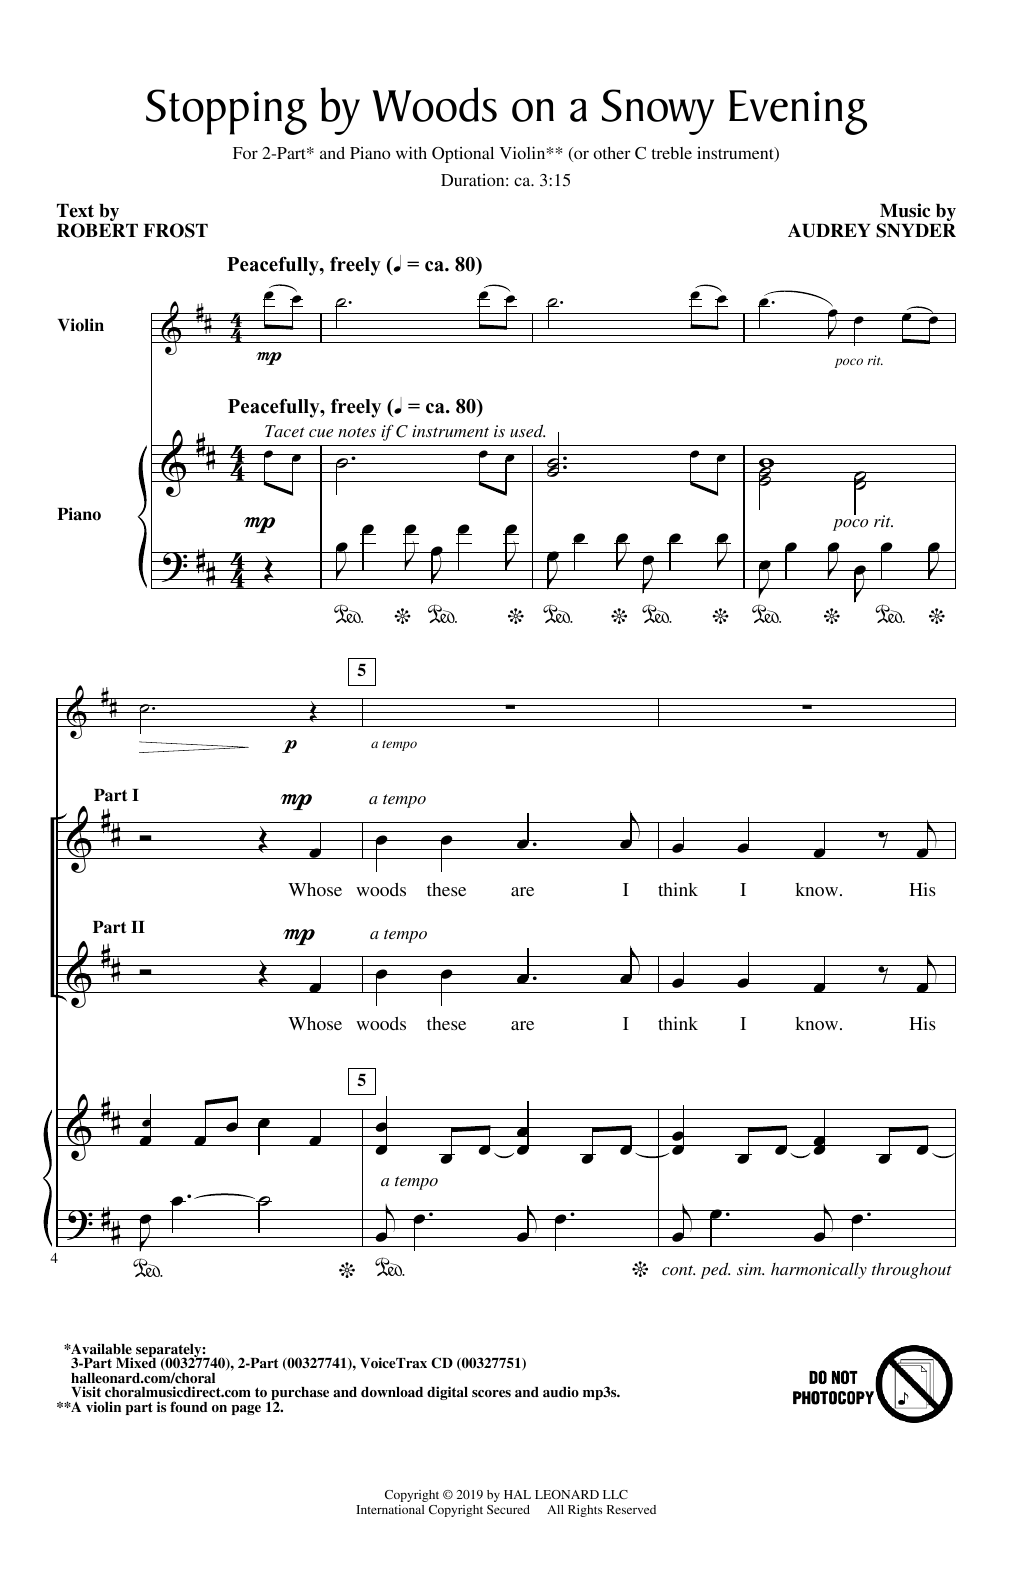 Download Audrey Snyder Stopping By Woods On A Snowy Evening Sheet Music